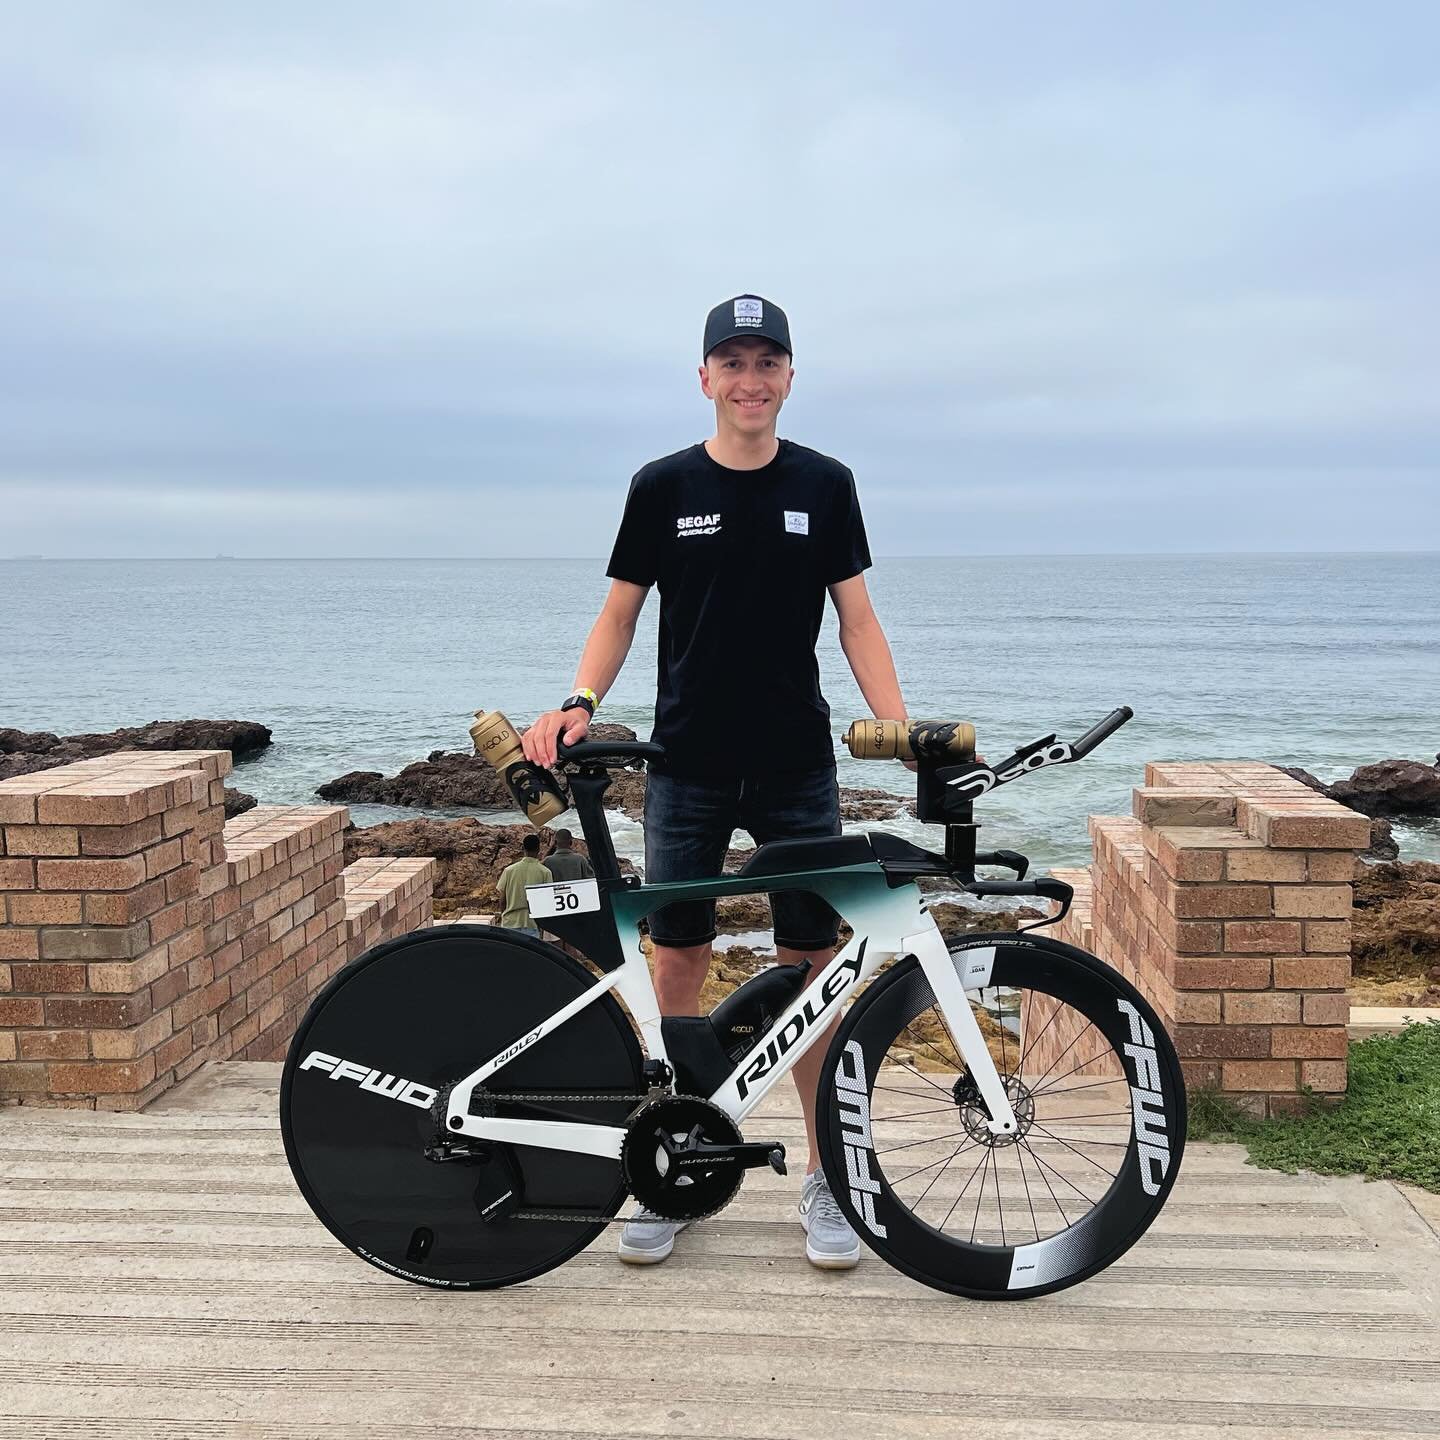 As an athlete, I thrive on pushing myself to new limits. Tomorrow&rsquo;s @ironmansouthafrica is my chance to showcase the best version of myself. I couldn&rsquo;t ask for a better preparation and I&rsquo;m ready to give it my all. Follow the race on